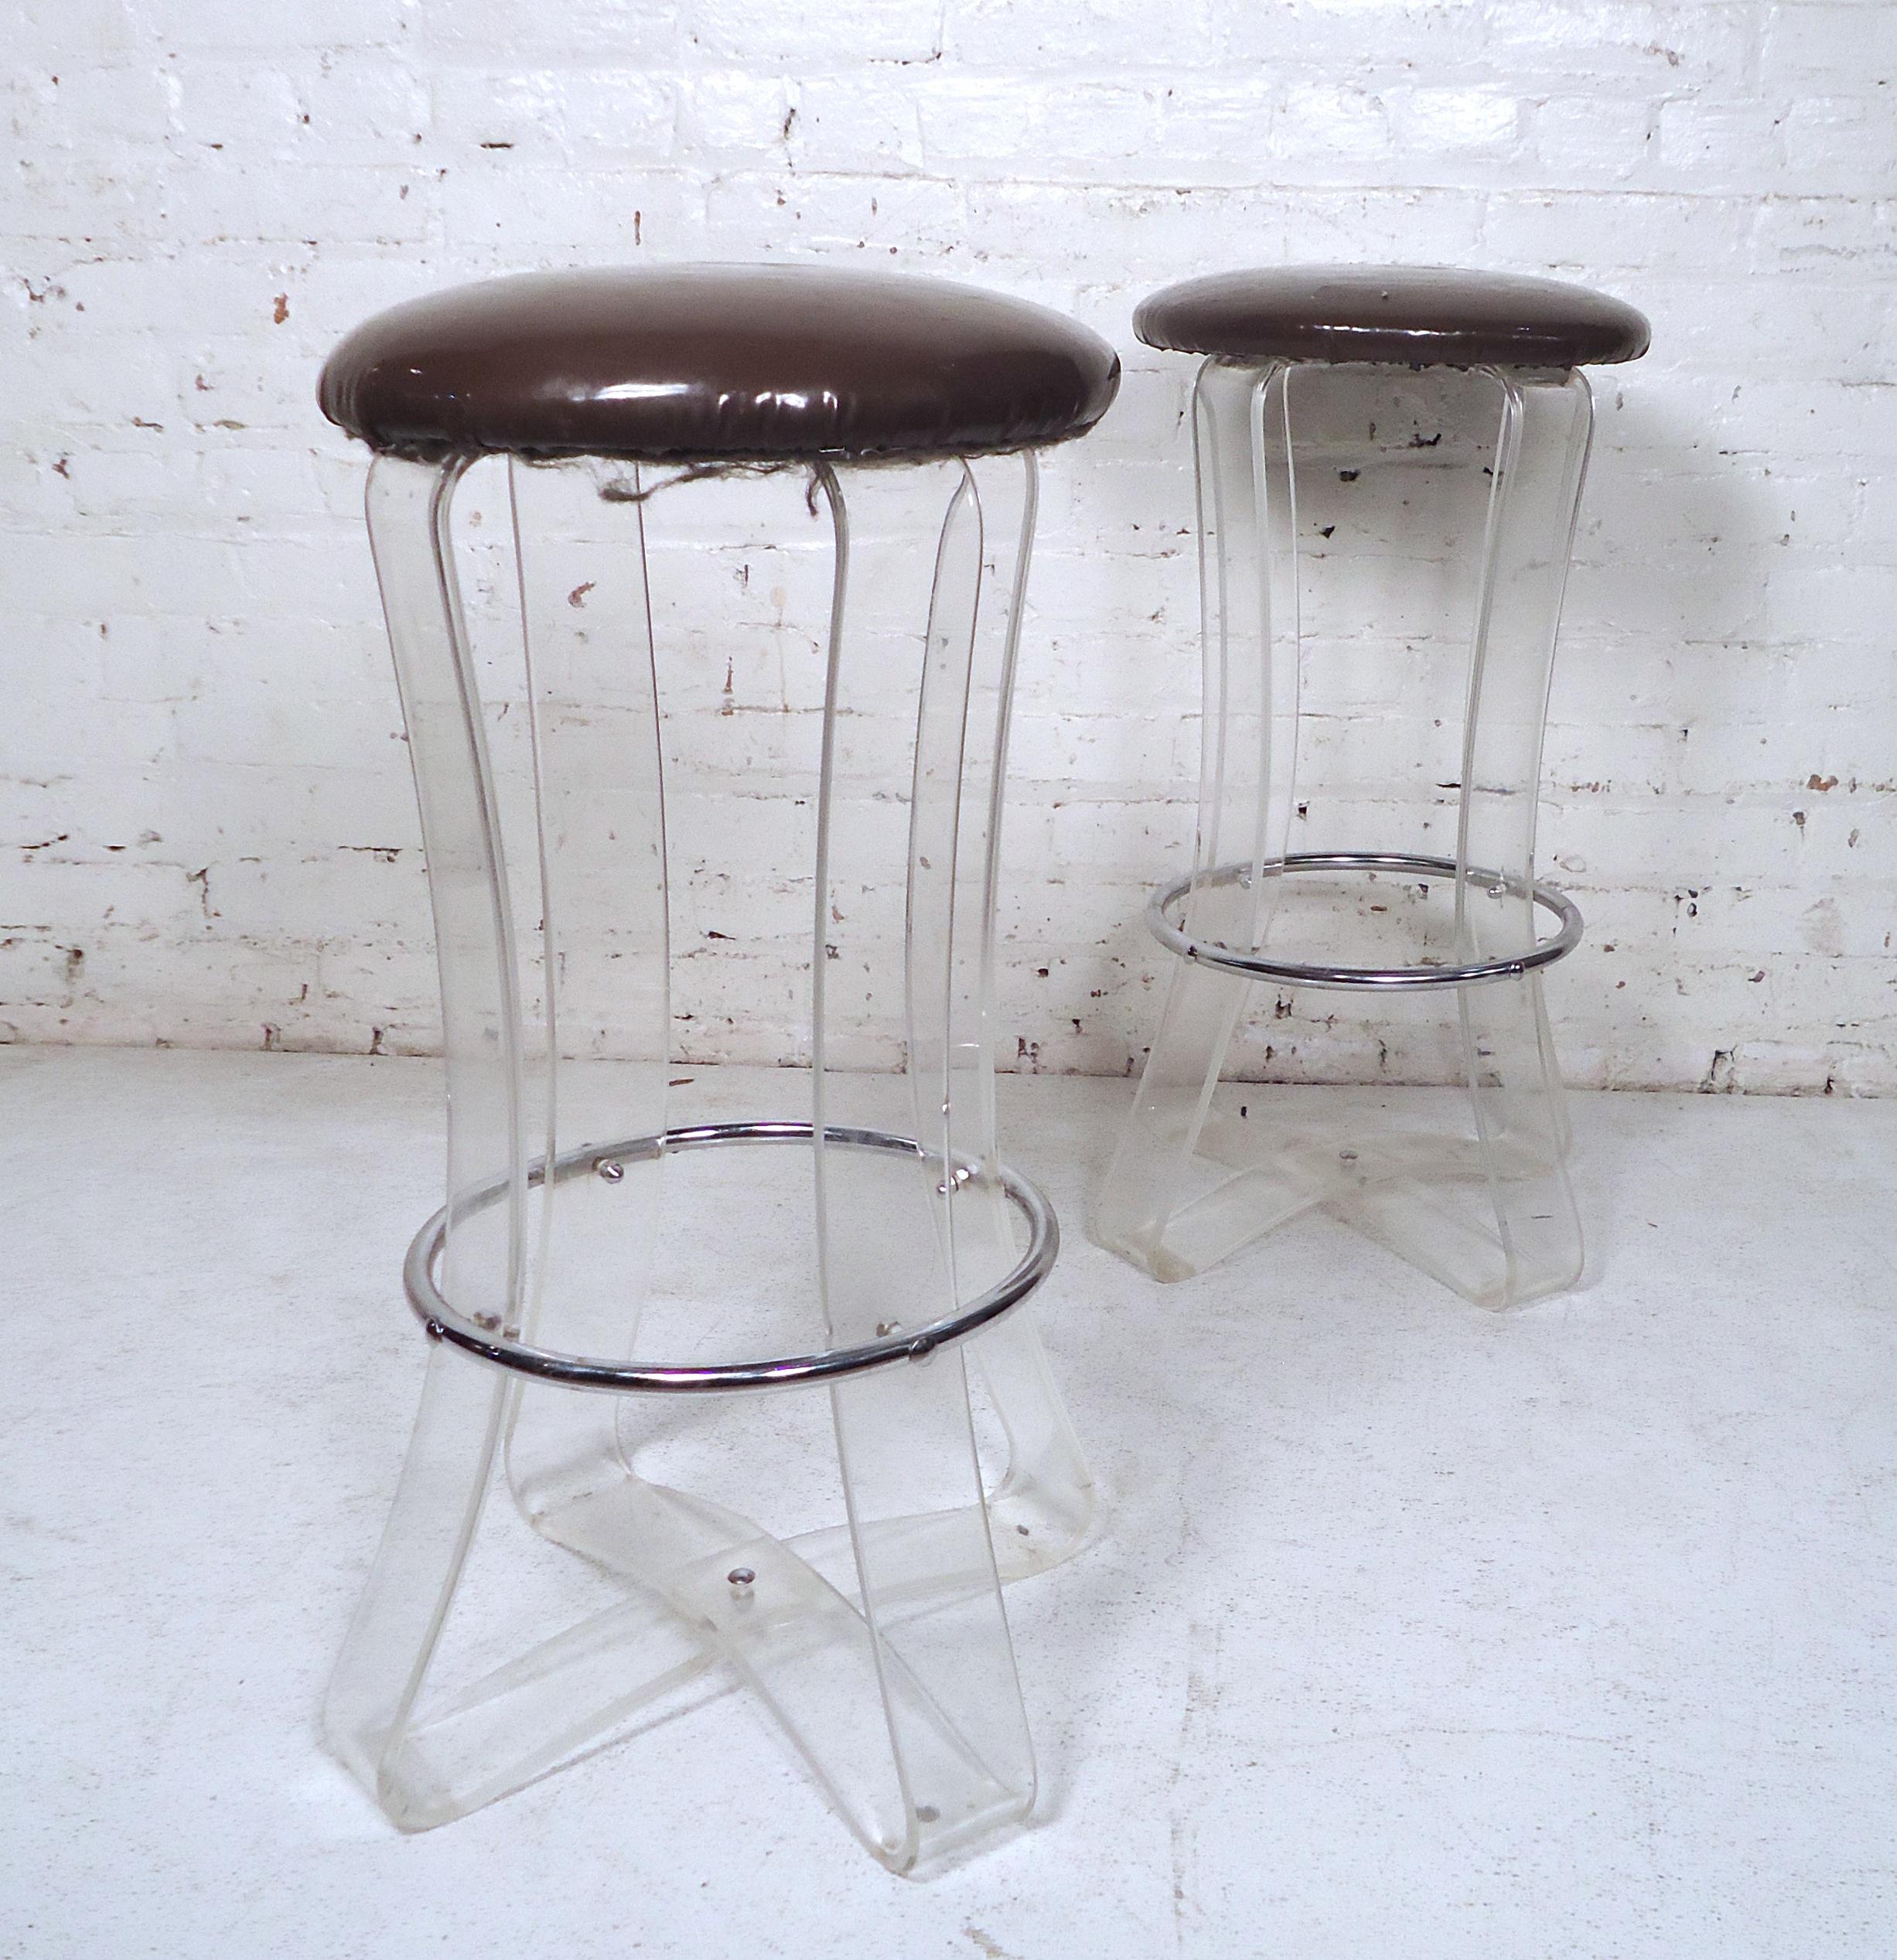 Unique pair of Mid-Century Modern Lucite stools featuring a metal footrest and vinyl seating.

(Please confirm item location NY or NJ with dealer).